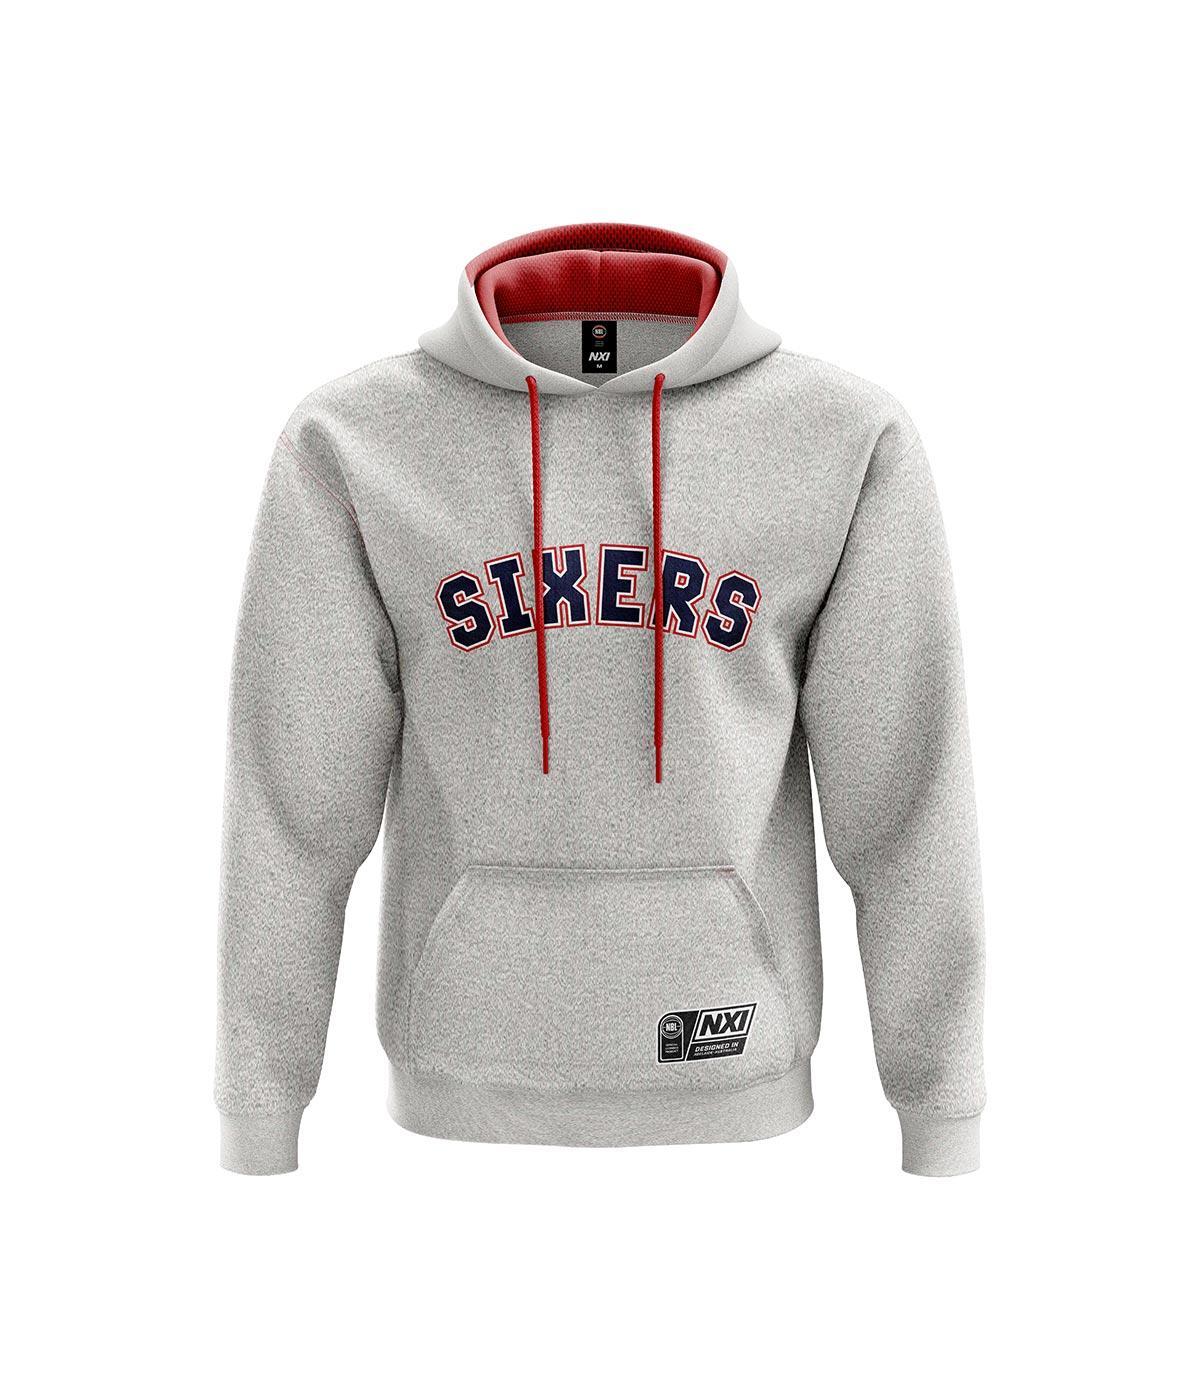 Sixers Grey Youth Hoodie